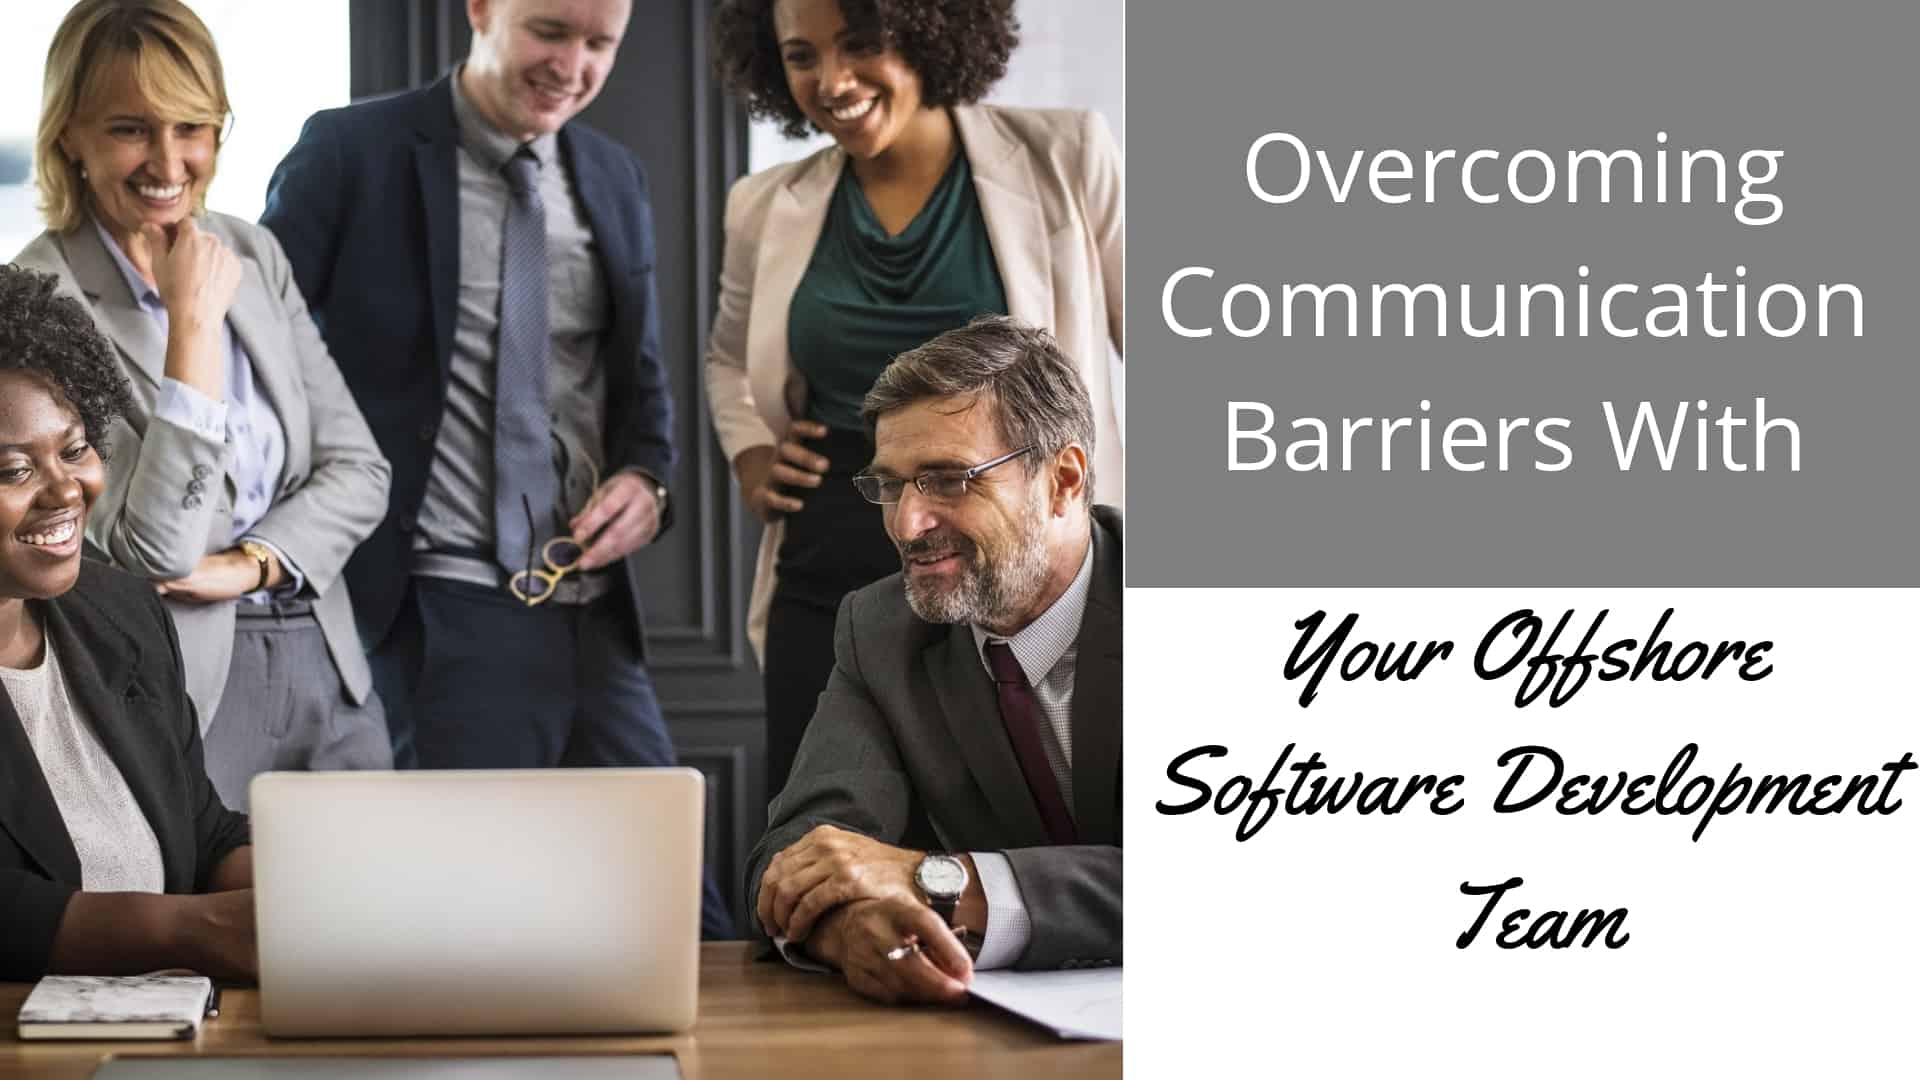 Overcoming Communication Barriers With Your Offshore Software Development Team